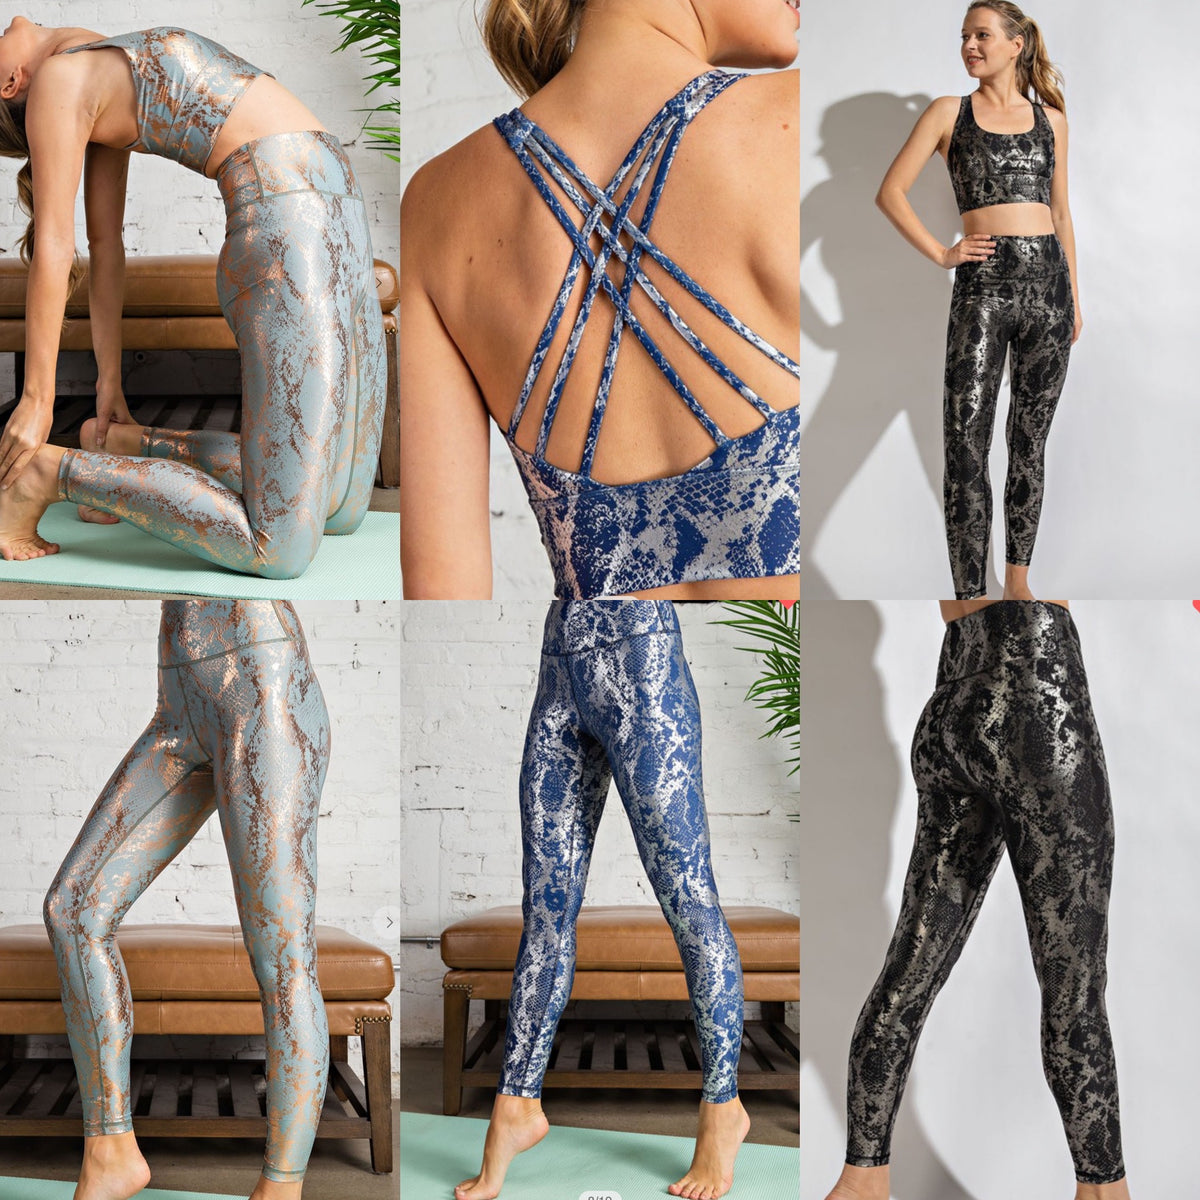 Butter Soft Leggings and Tops in Prints! – Follow The Trends Online